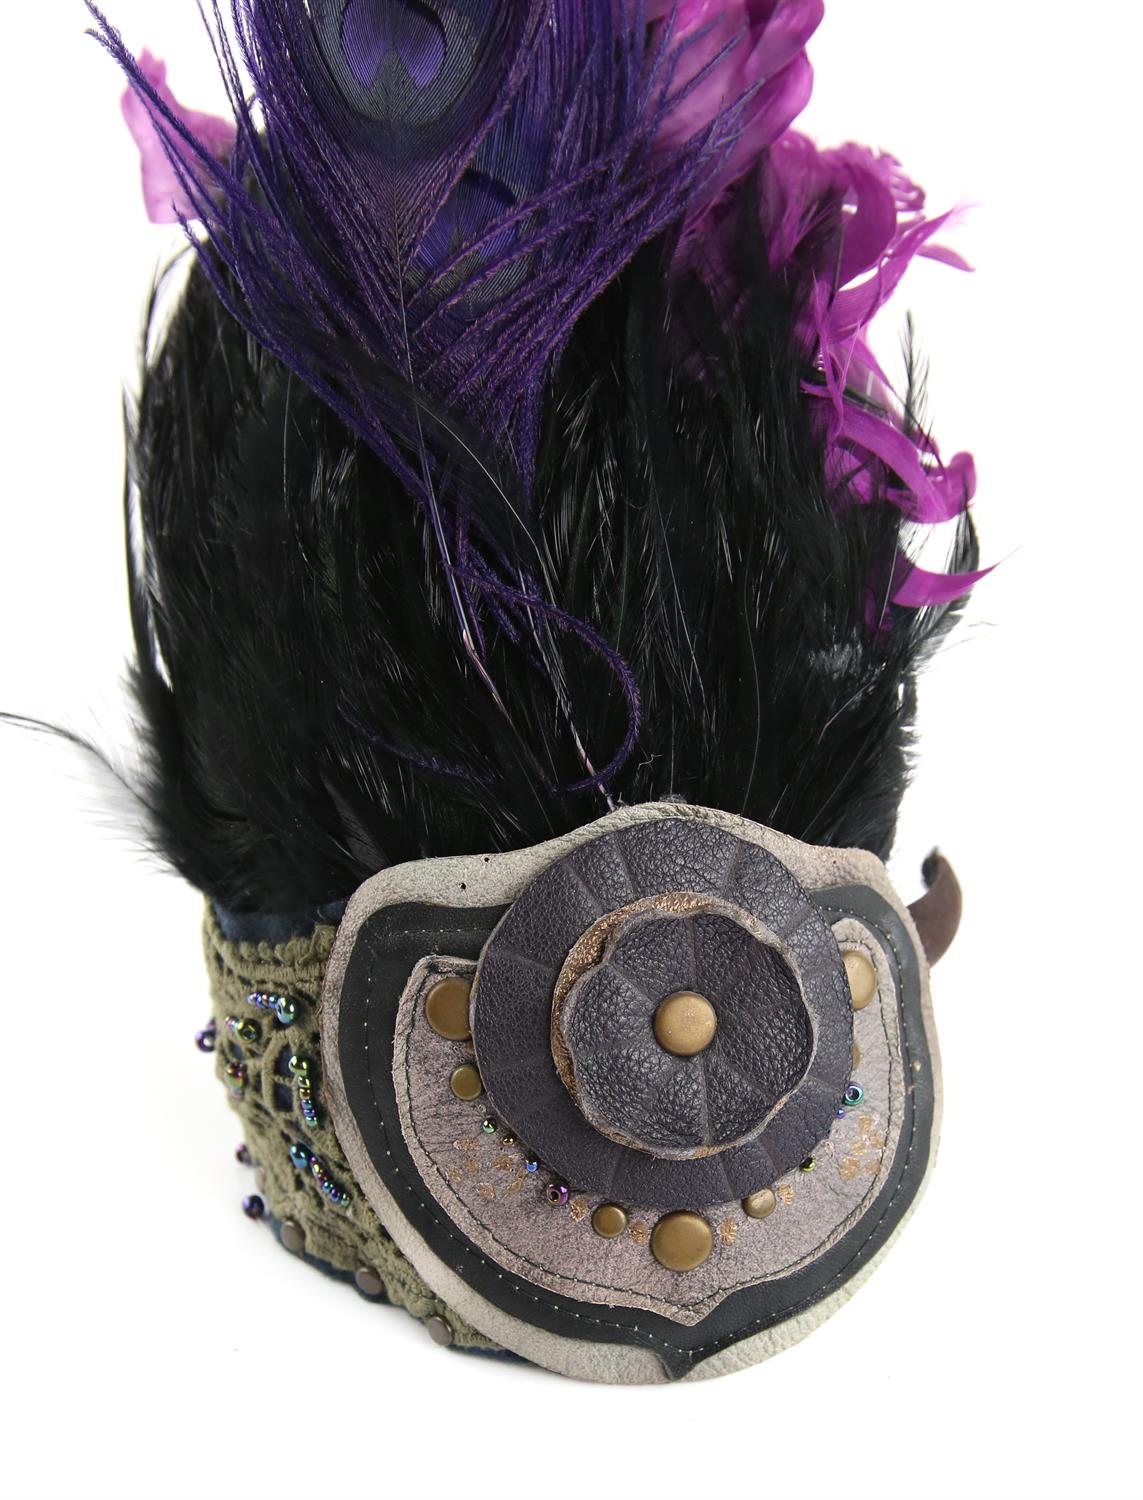 Lady Gaga - a purple feather headdress from the Monster Ball tour, 2009 - 2011, Bedford Falls - Image 5 of 6